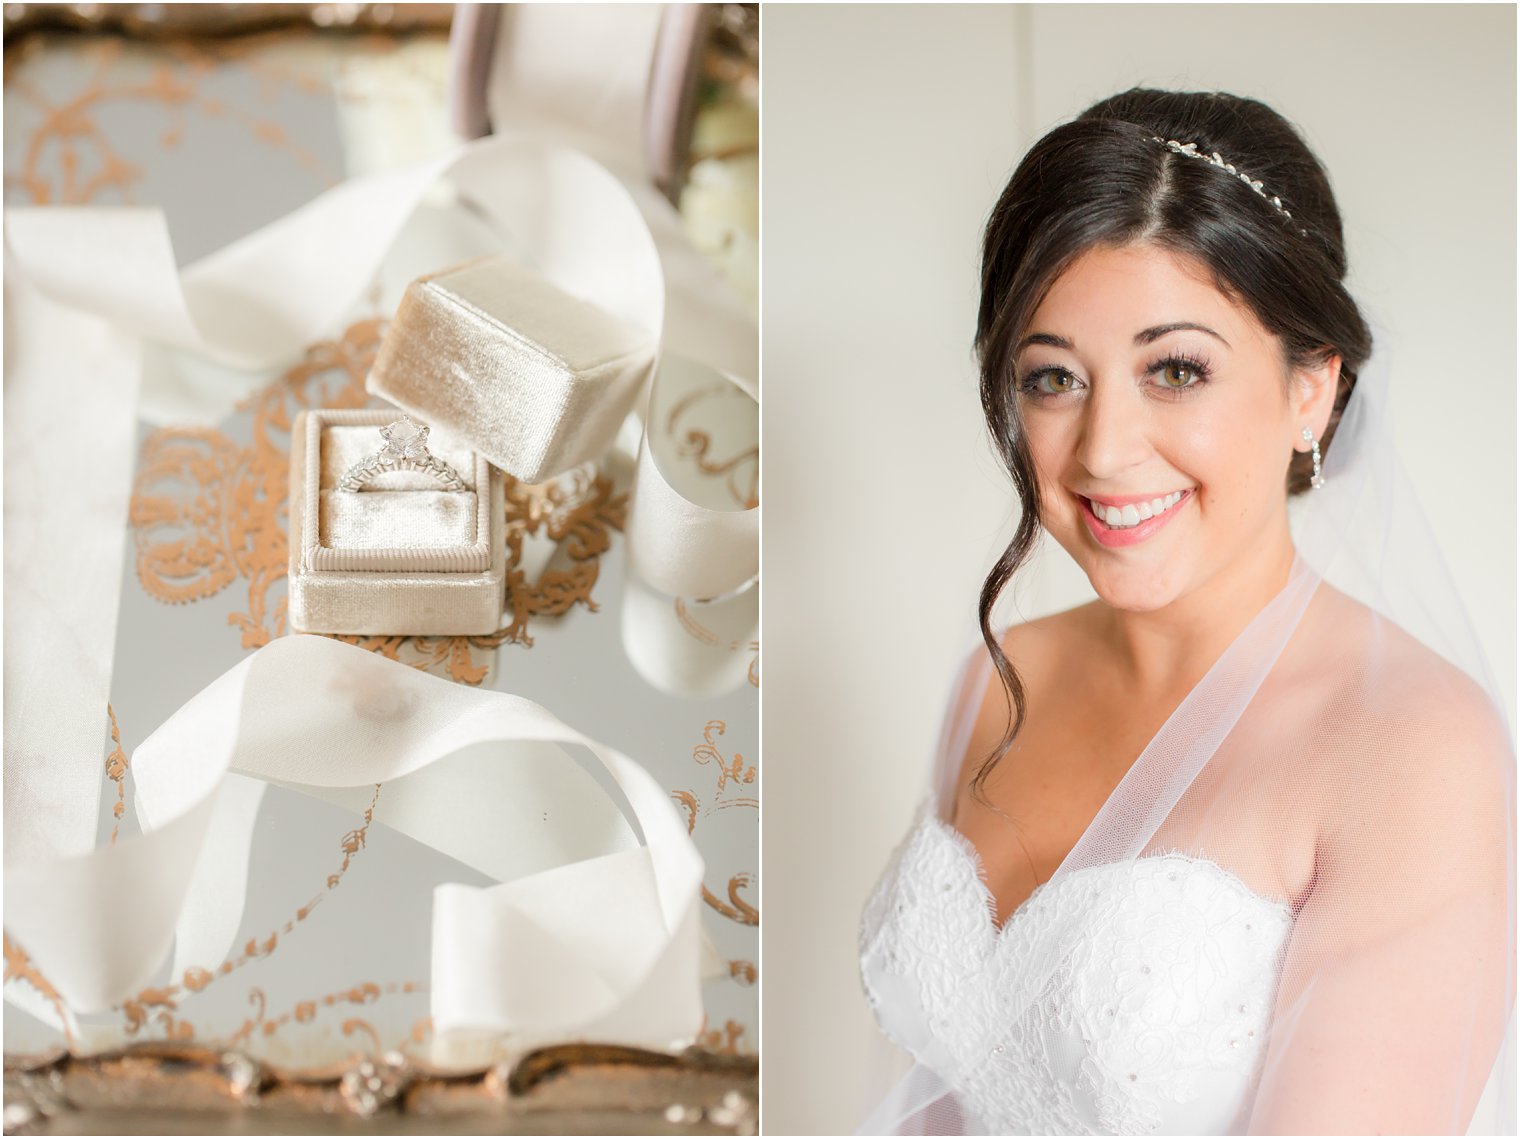 engagement ring next to classic bridal portrait of bride with dress and veil by Idalia Photography